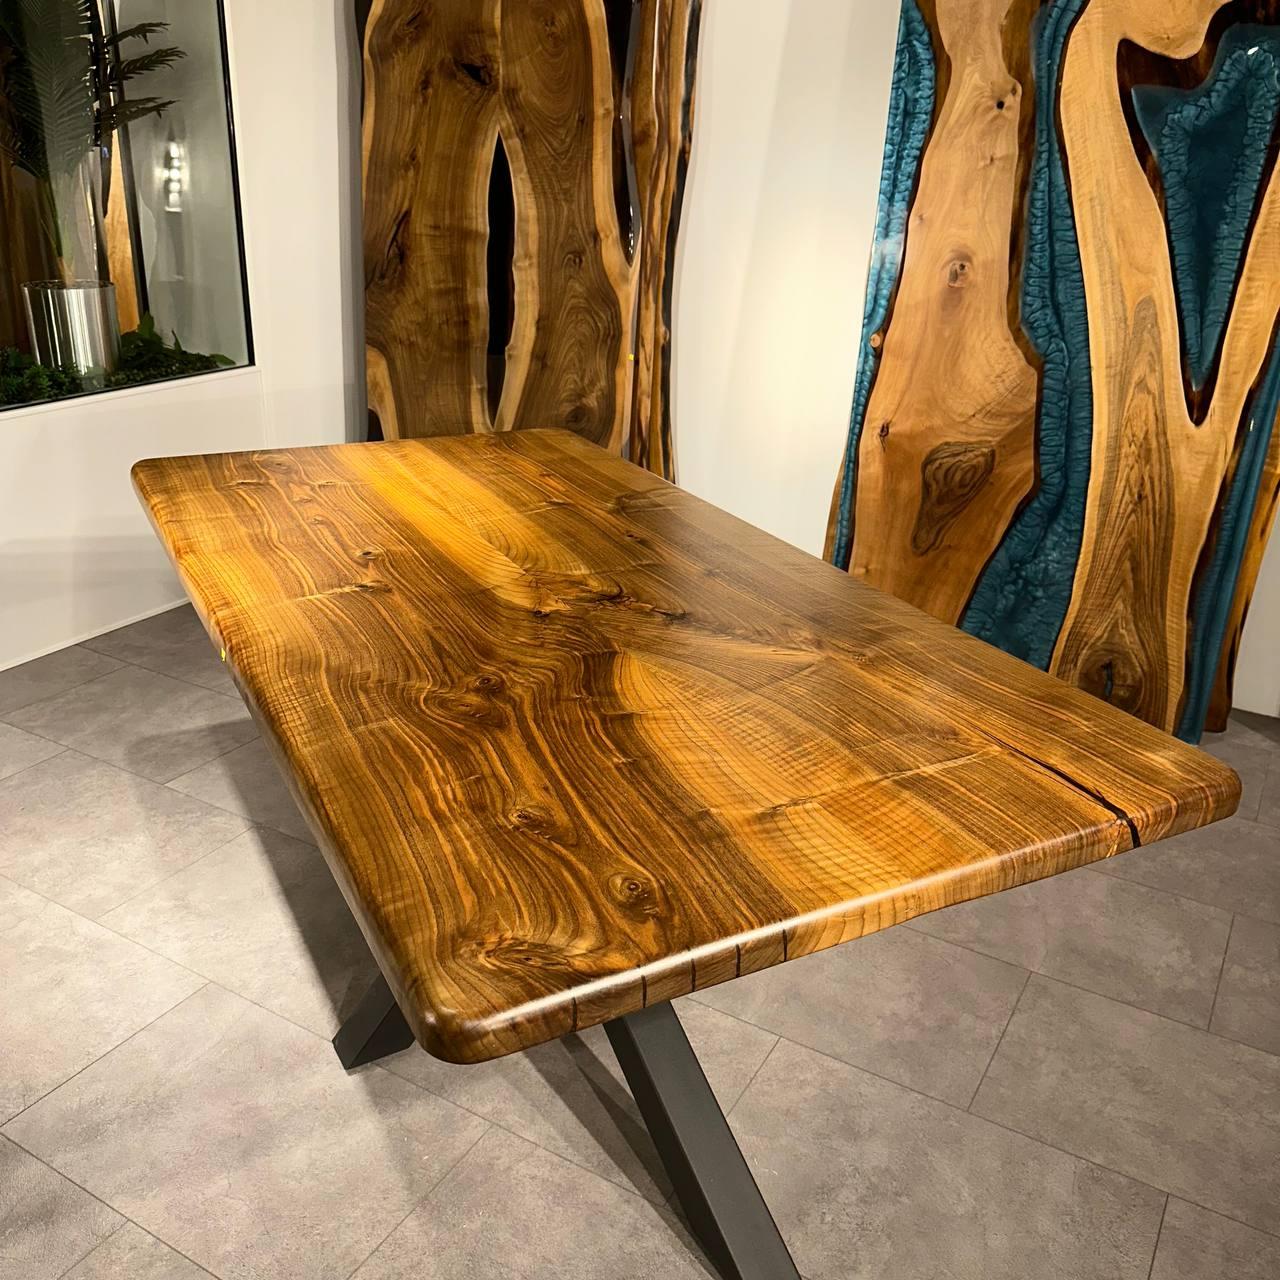 LIVE EDGE CUSTOM WALNUT DINING TABLE

This table is made of natural walnut slabs. 

Some Walnut slabs have a lot of natural beauty as it’s one side has a large curve. This is one of them! 

We've filled the cracks with black epoxy, without